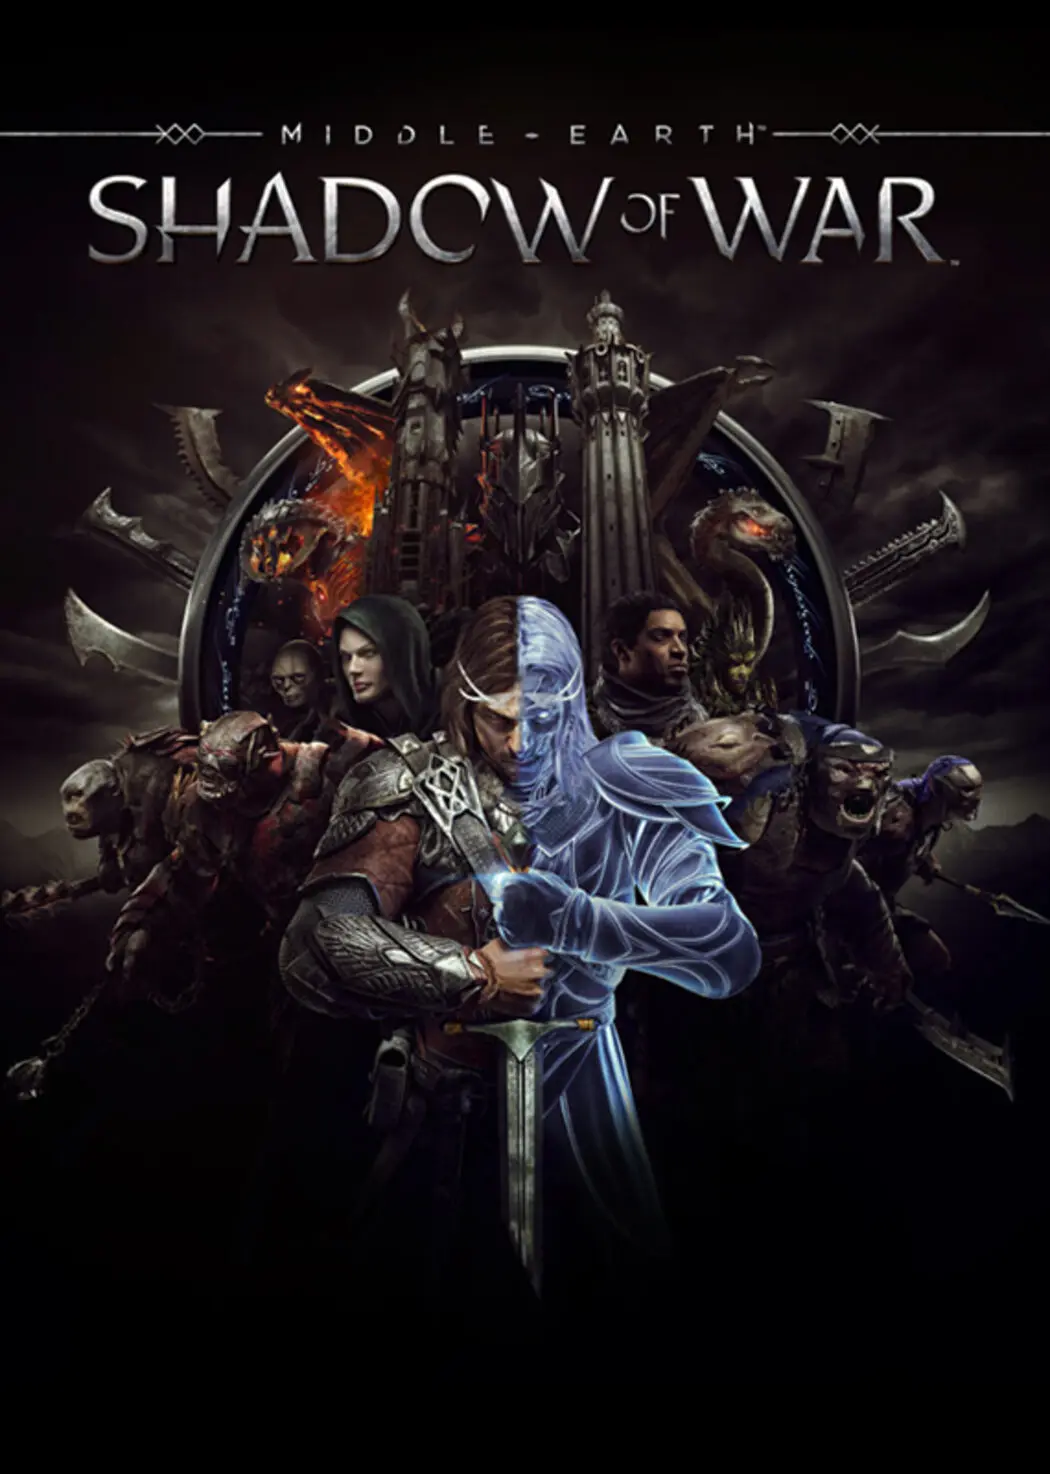 Middle-earth Shadow of War Day One DLC (PC) - Steam - Digital Code